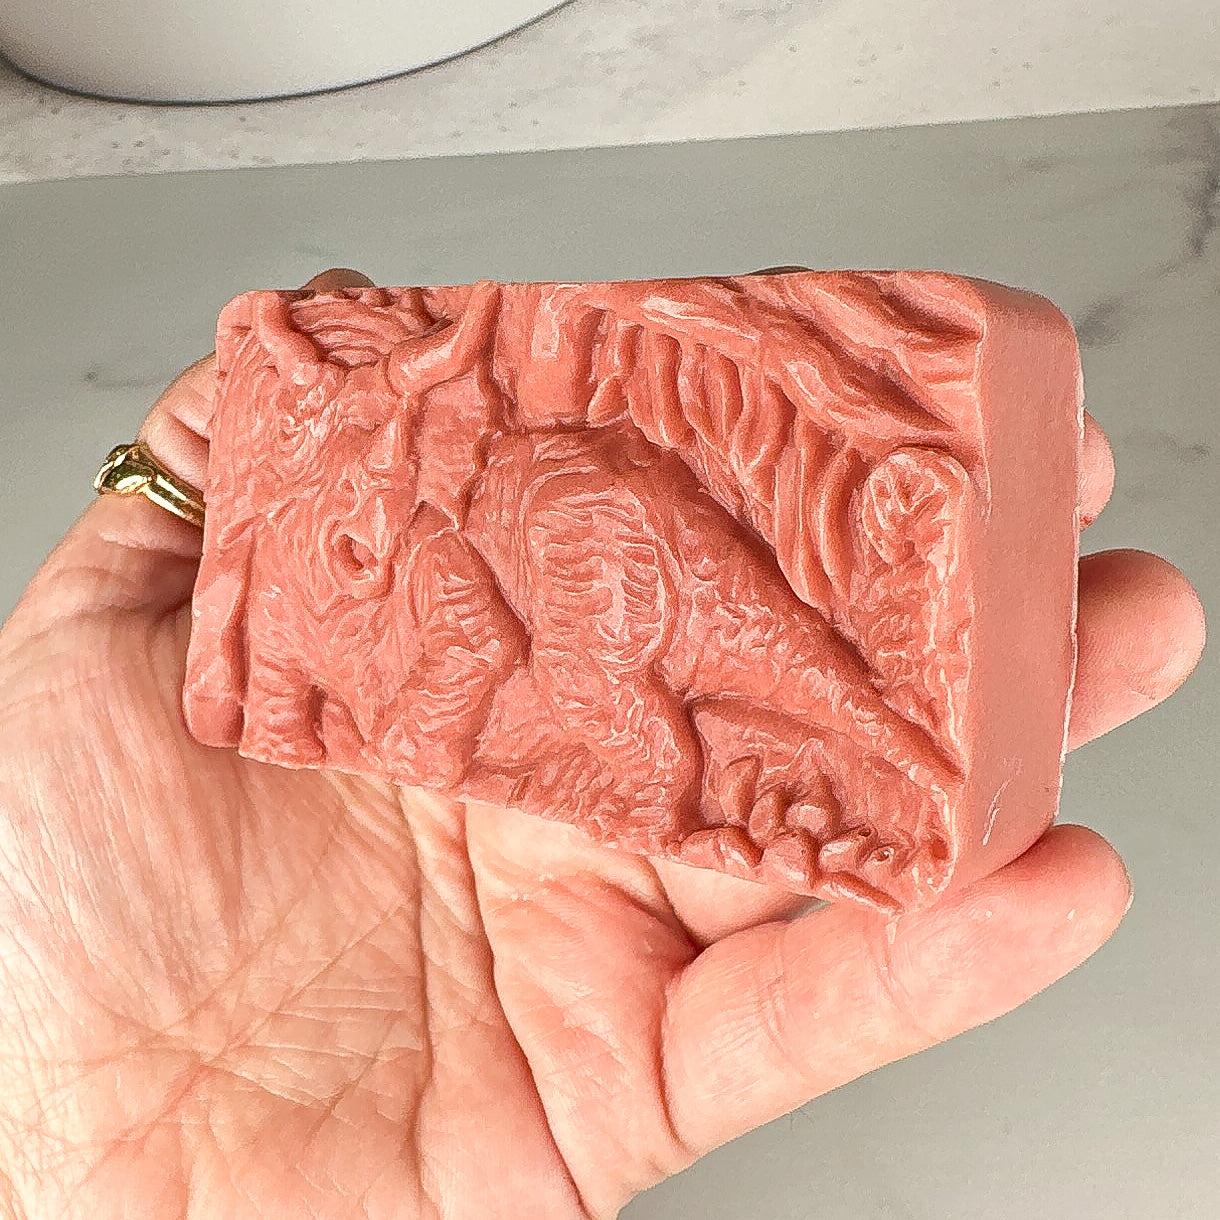 Triceratops Soap Bar - The Serpentry